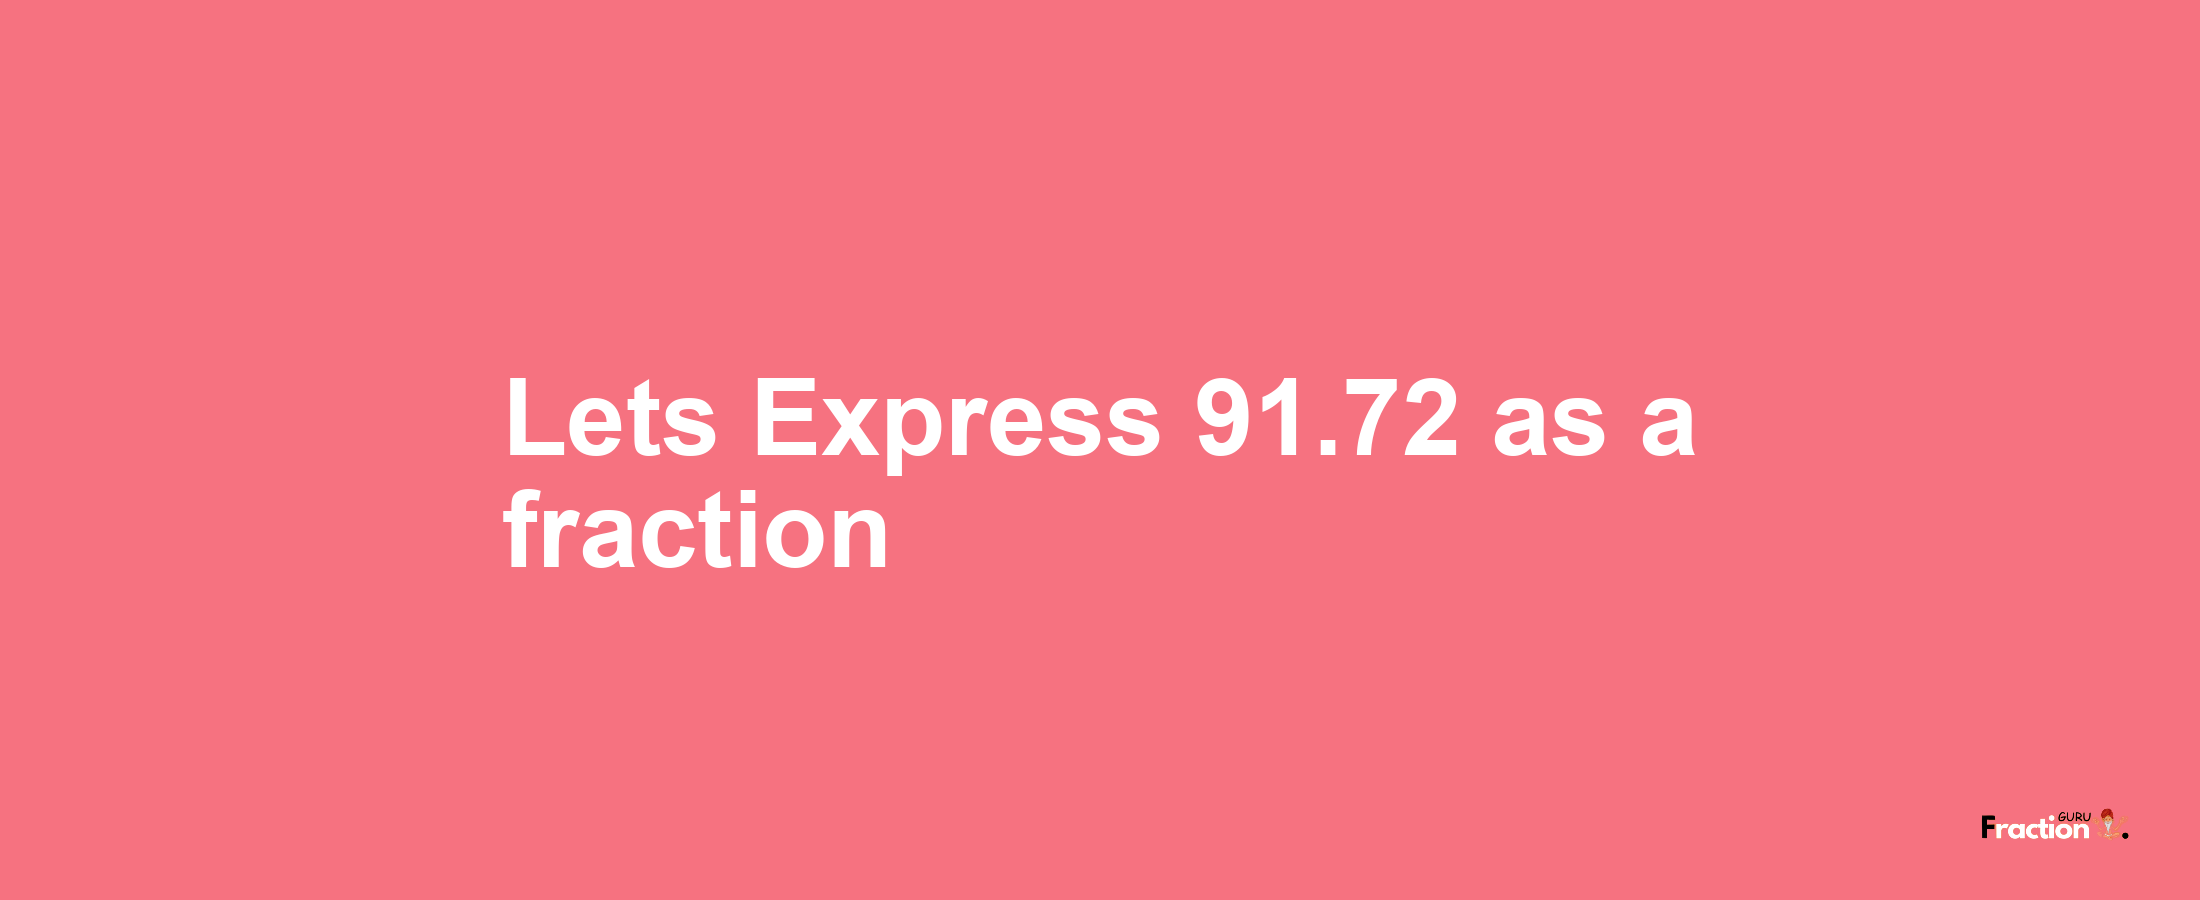 Lets Express 91.72 as afraction